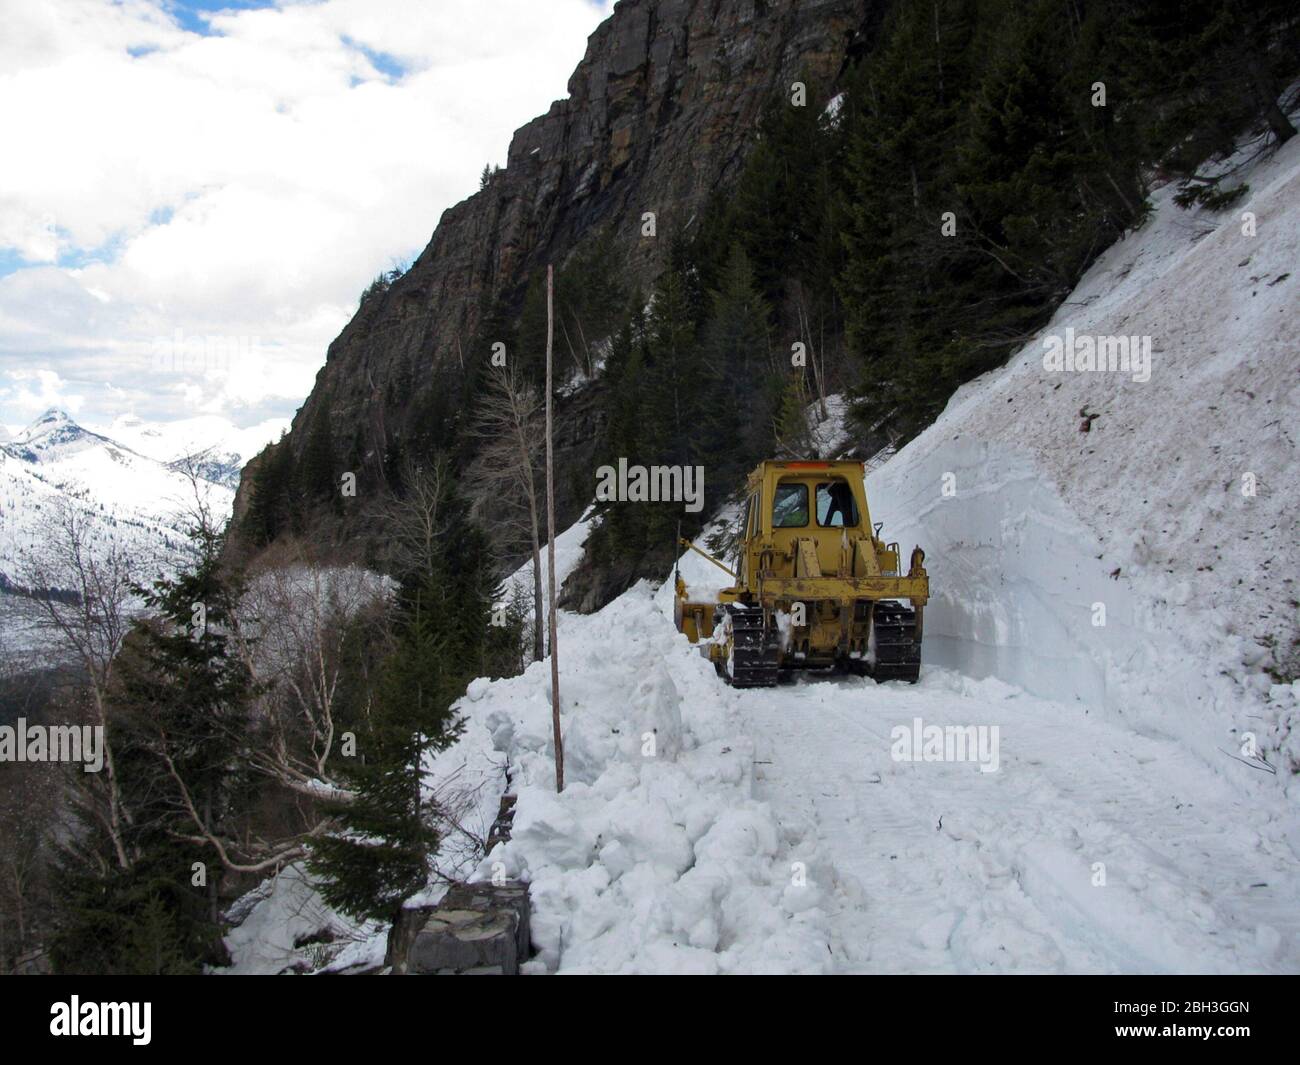 Snow removal equipment along the winding Going-To-The-Sun road at an elevation of 6,646 feet in Glacier National Park April 21, 2020 in Glacier, Montana. Road clearing continues despite the park being closed to visitors due to the COVID-19, coronavirus pandemic. Stock Photo